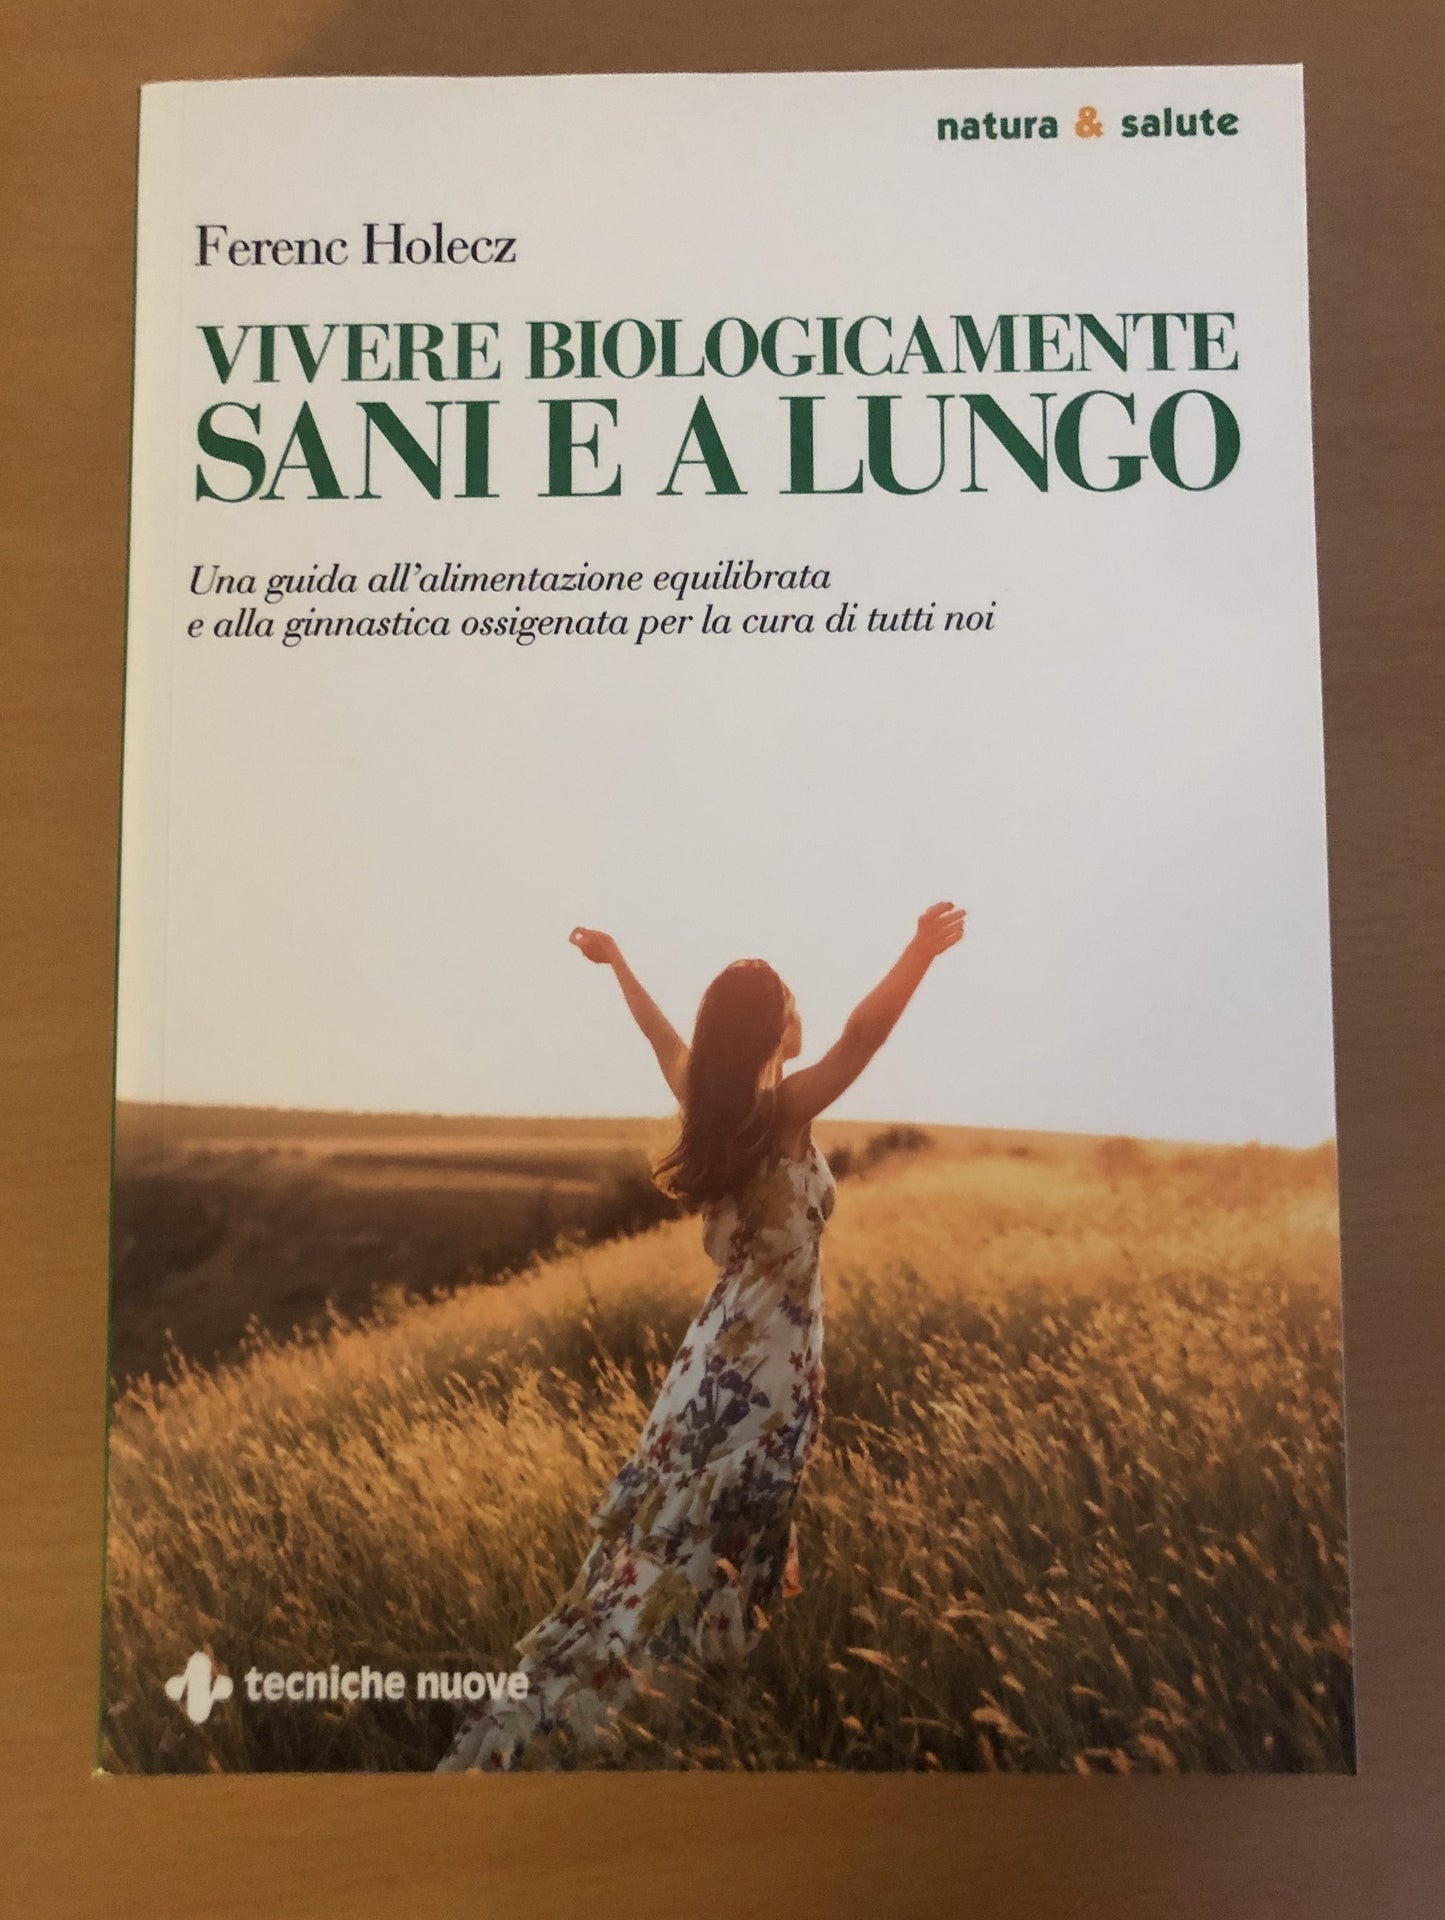 Book "Living biologically healthy and long" (Macrocosmo)